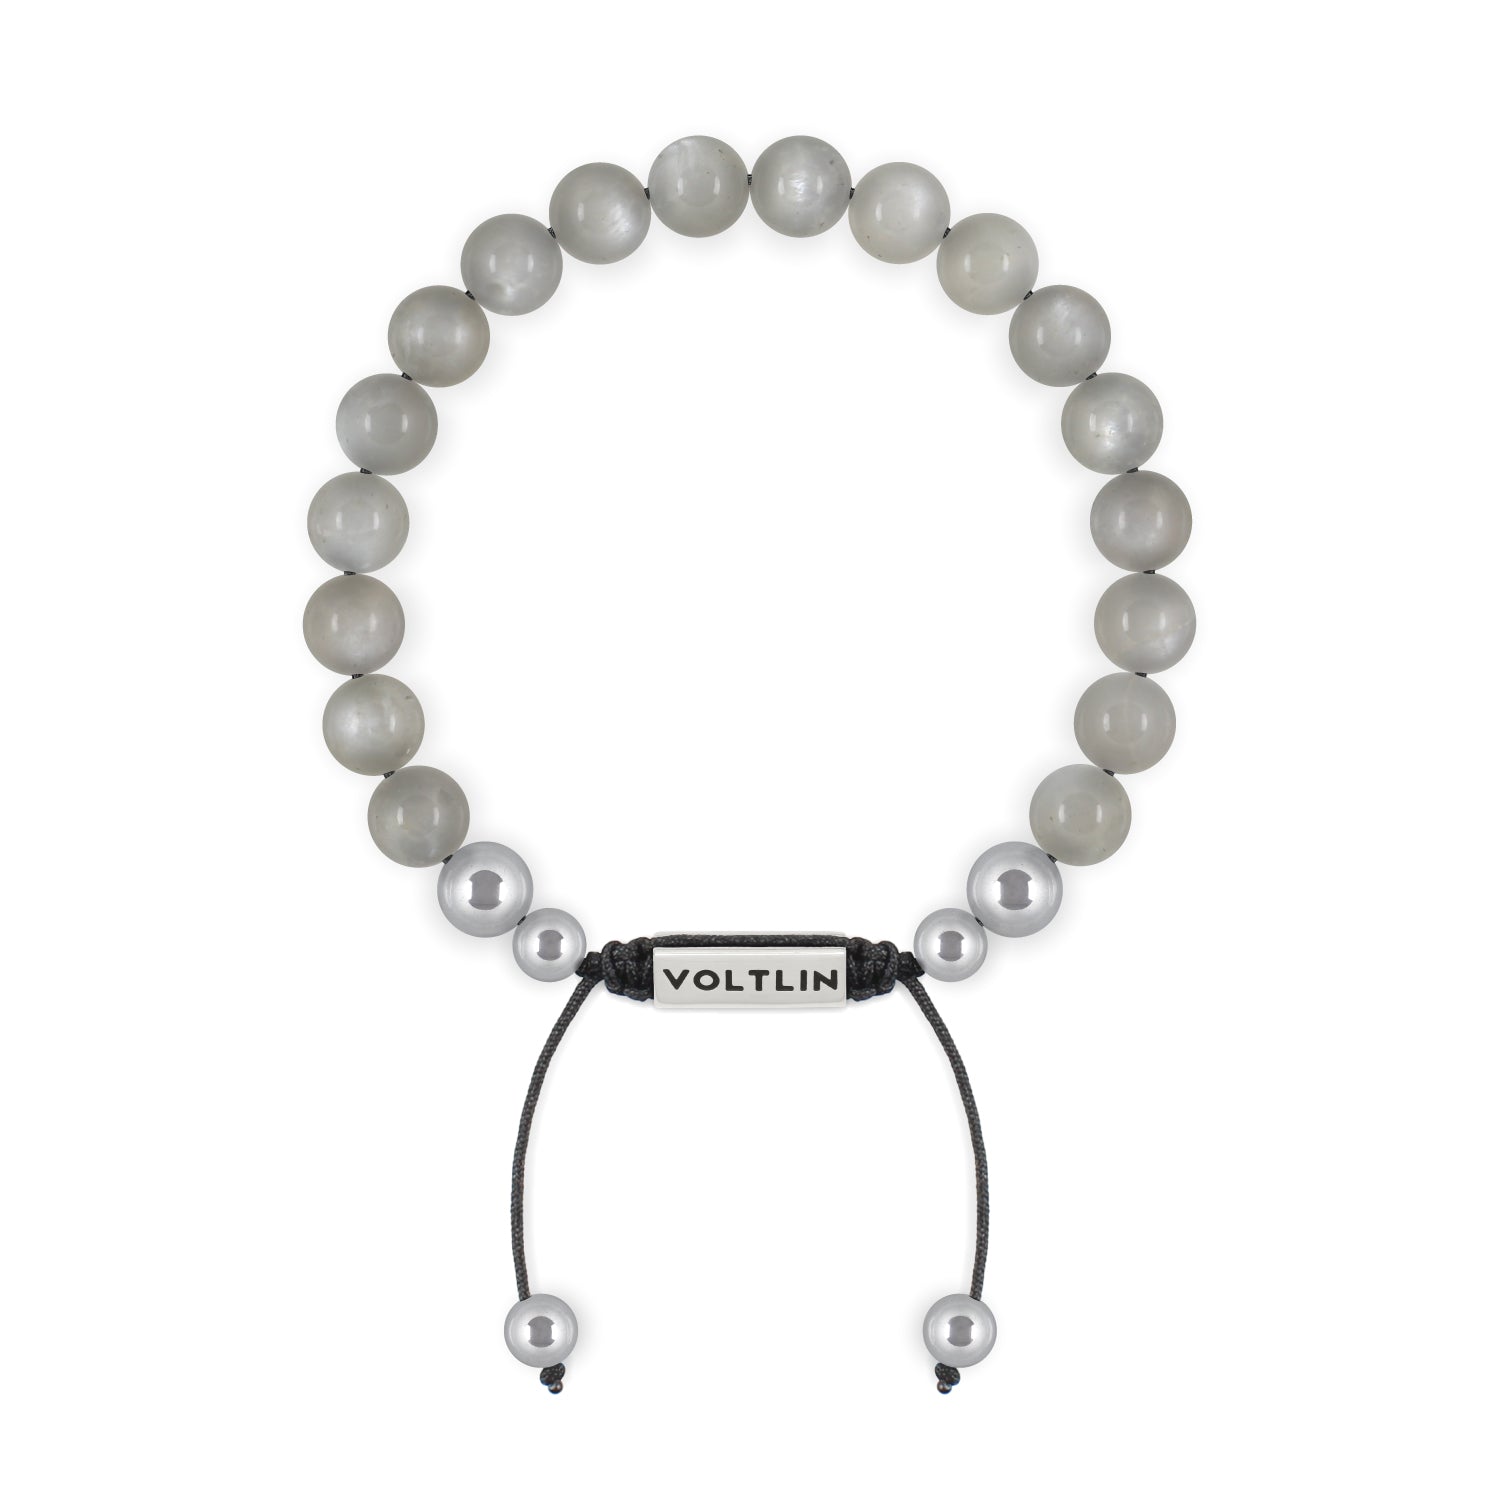 Front view of an 8mm Moonstone beaded shamballa bracelet with silver stainless steel logo bead made by Voltlin